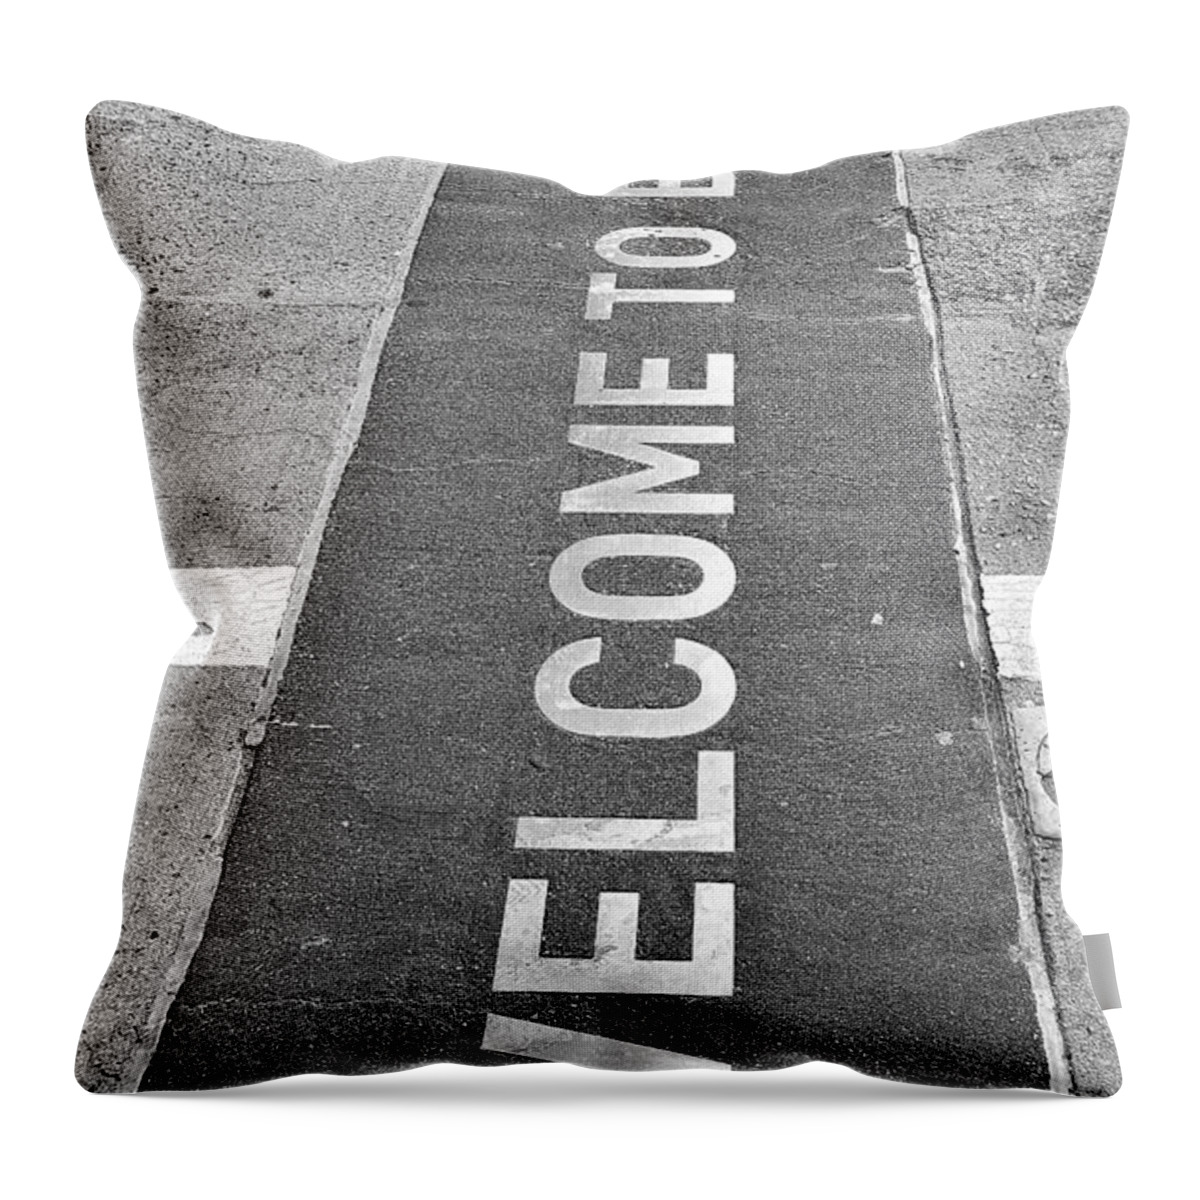 Brooklyn Bridge Throw Pillow featuring the photograph Welcome To Brooklyn by Rob Hans